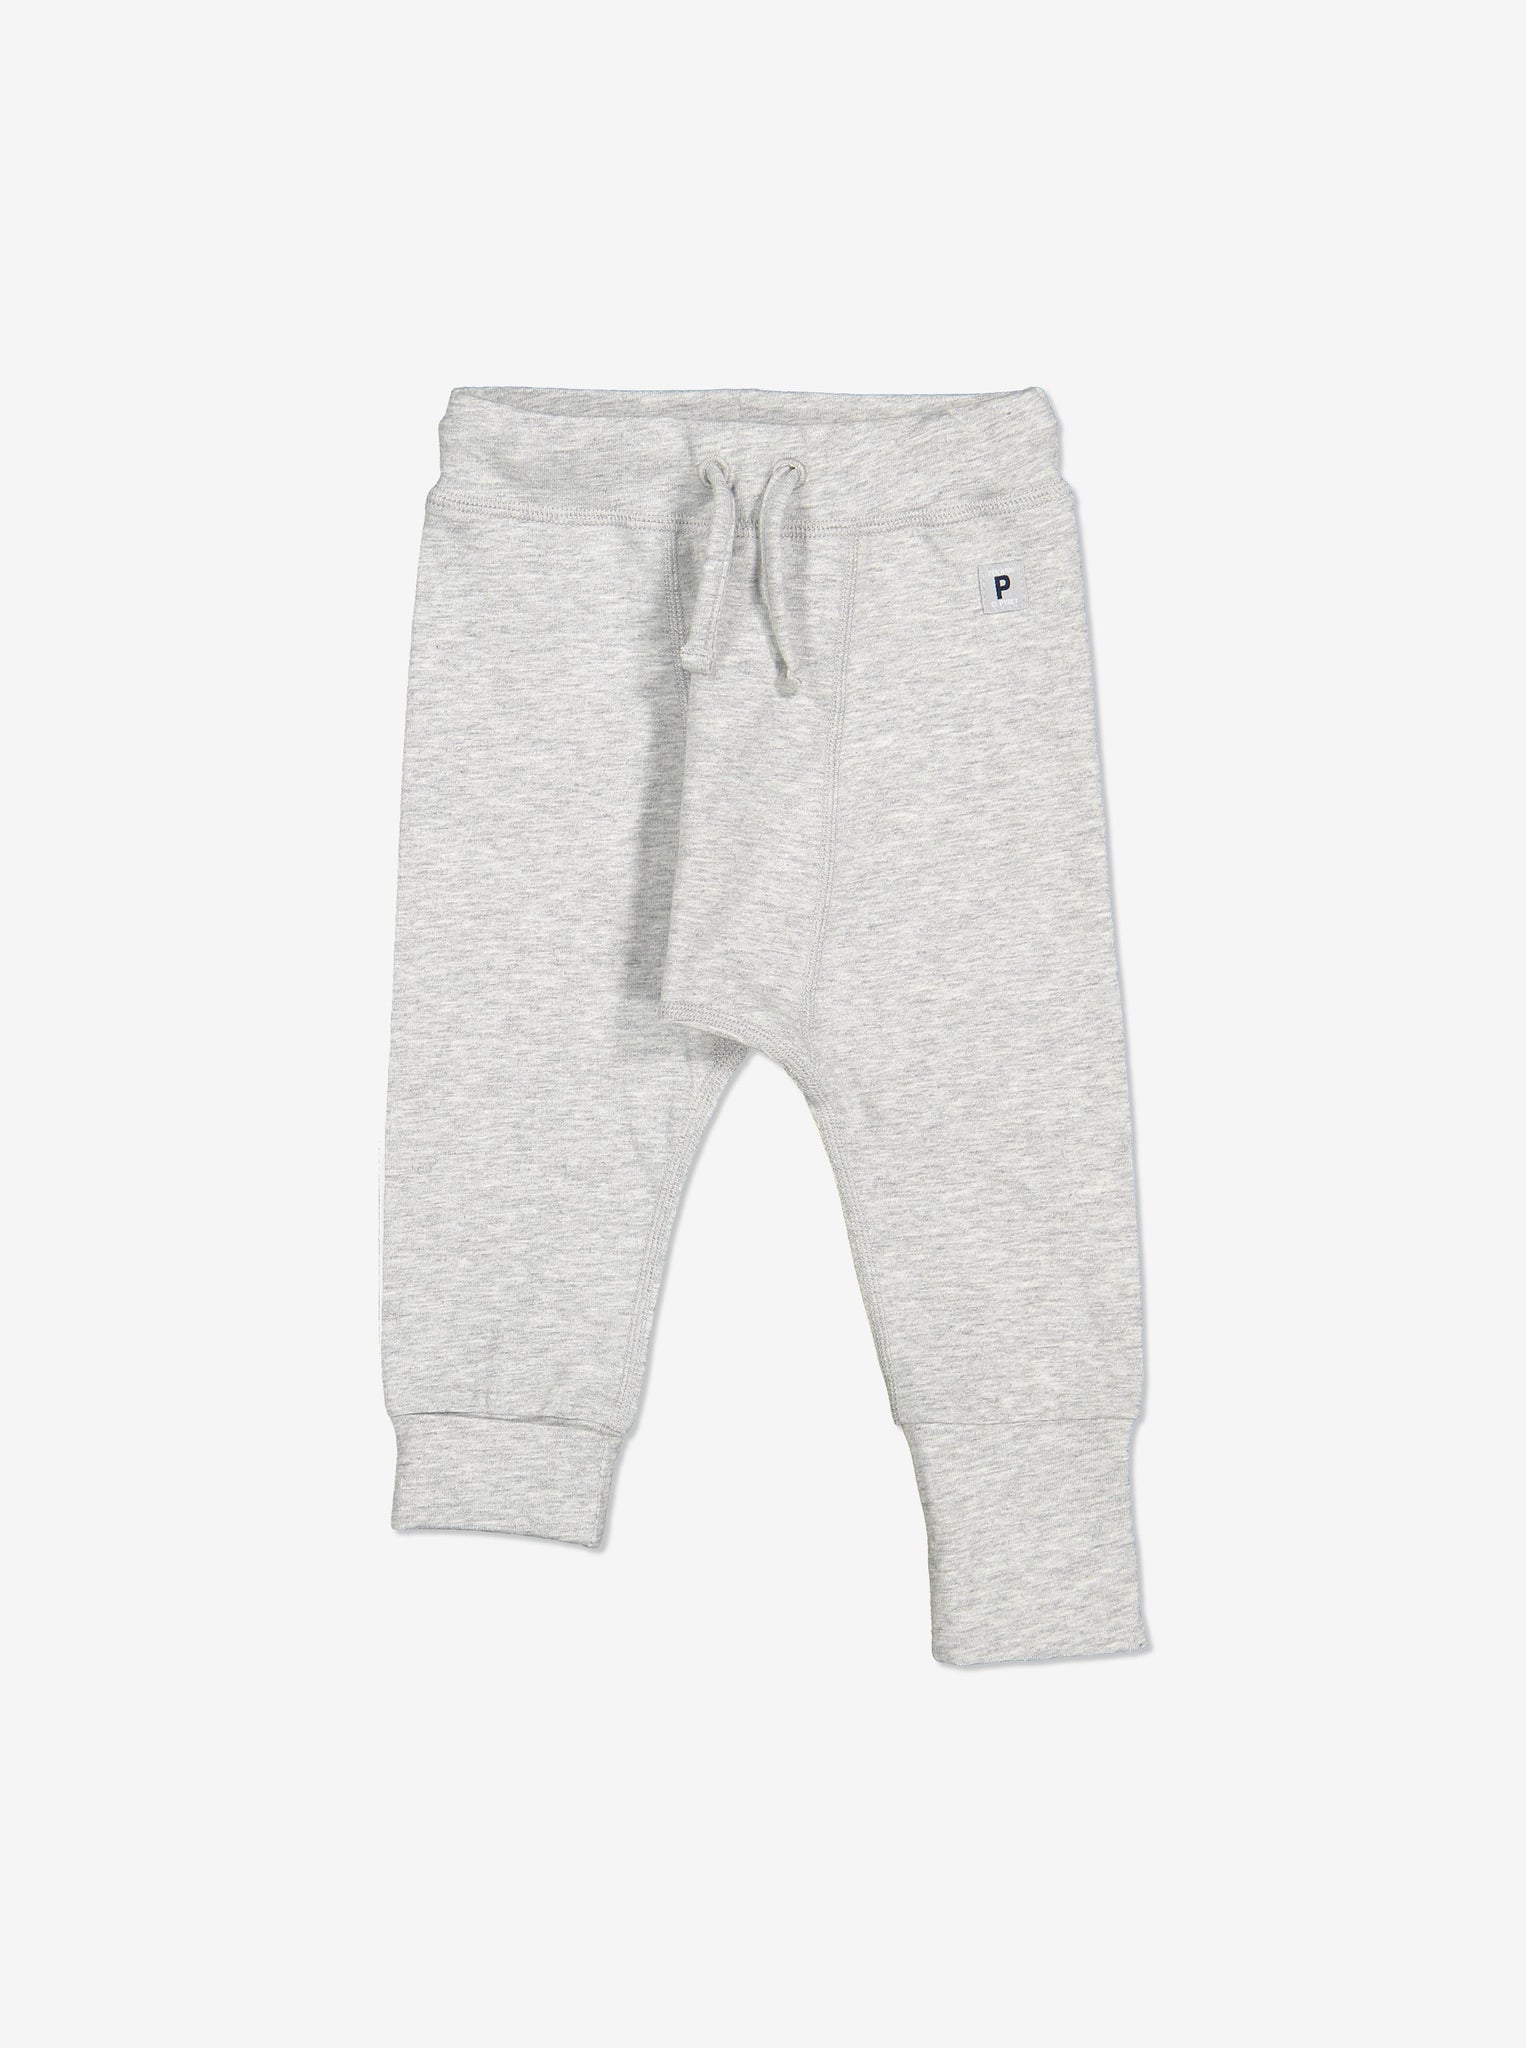 Soft Baby Trousers-Unisex-0-1y-Grey